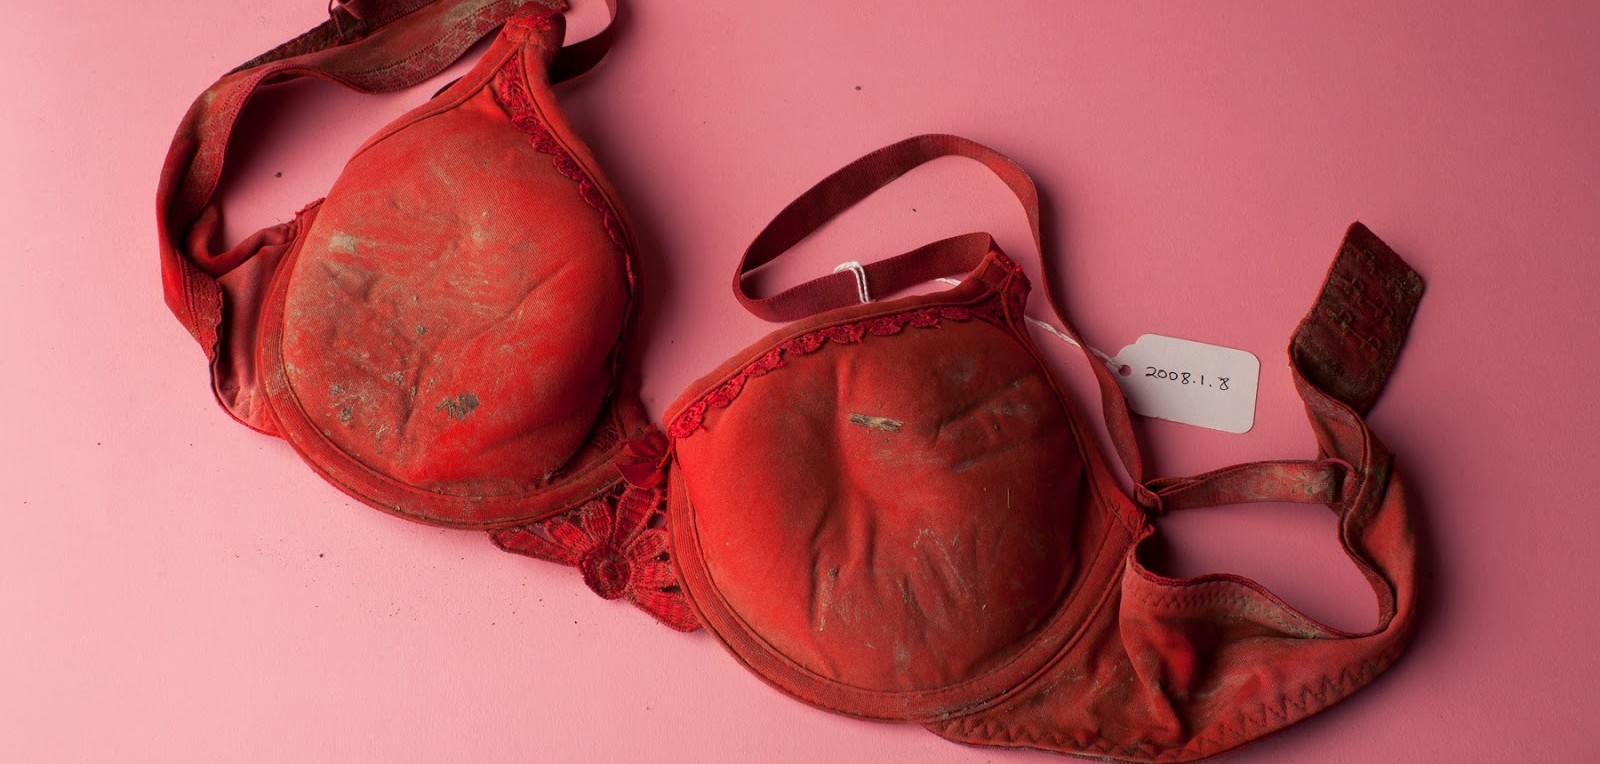 Red Bra, Anti-Archive; Object No. 8, Brownsville, Texas, Found 2008